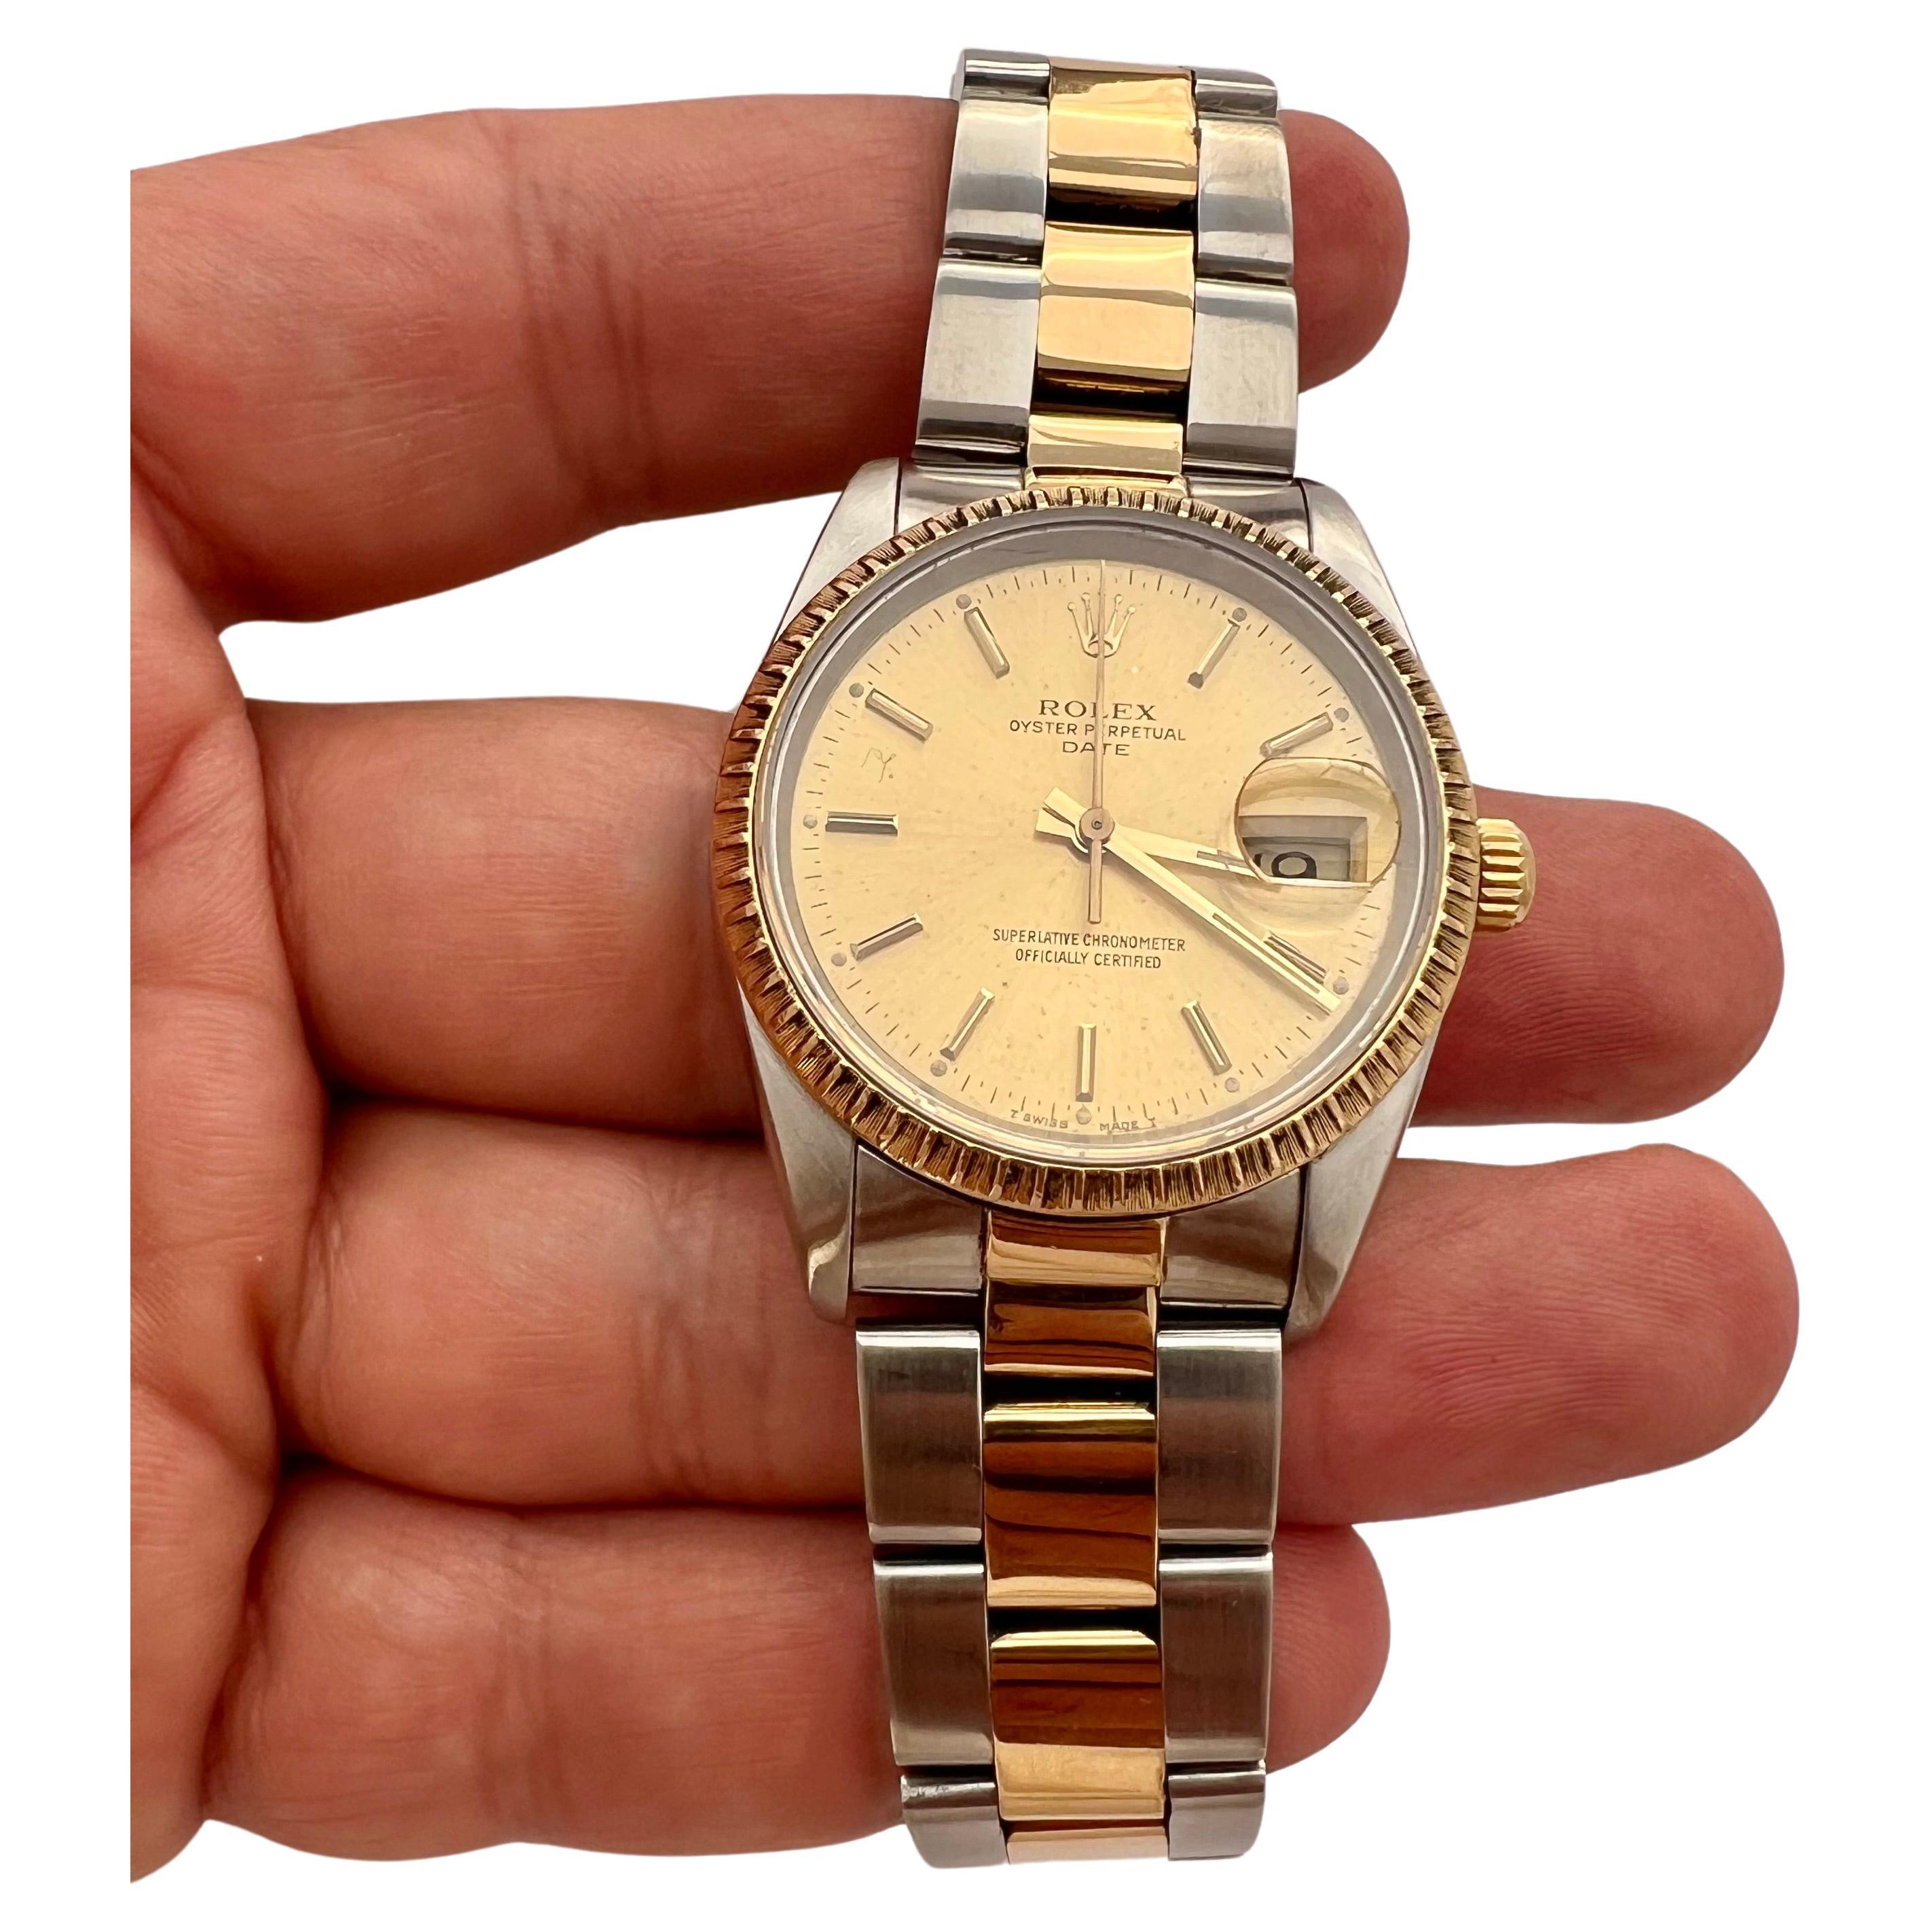 Why is buying a Rolex a good investment?